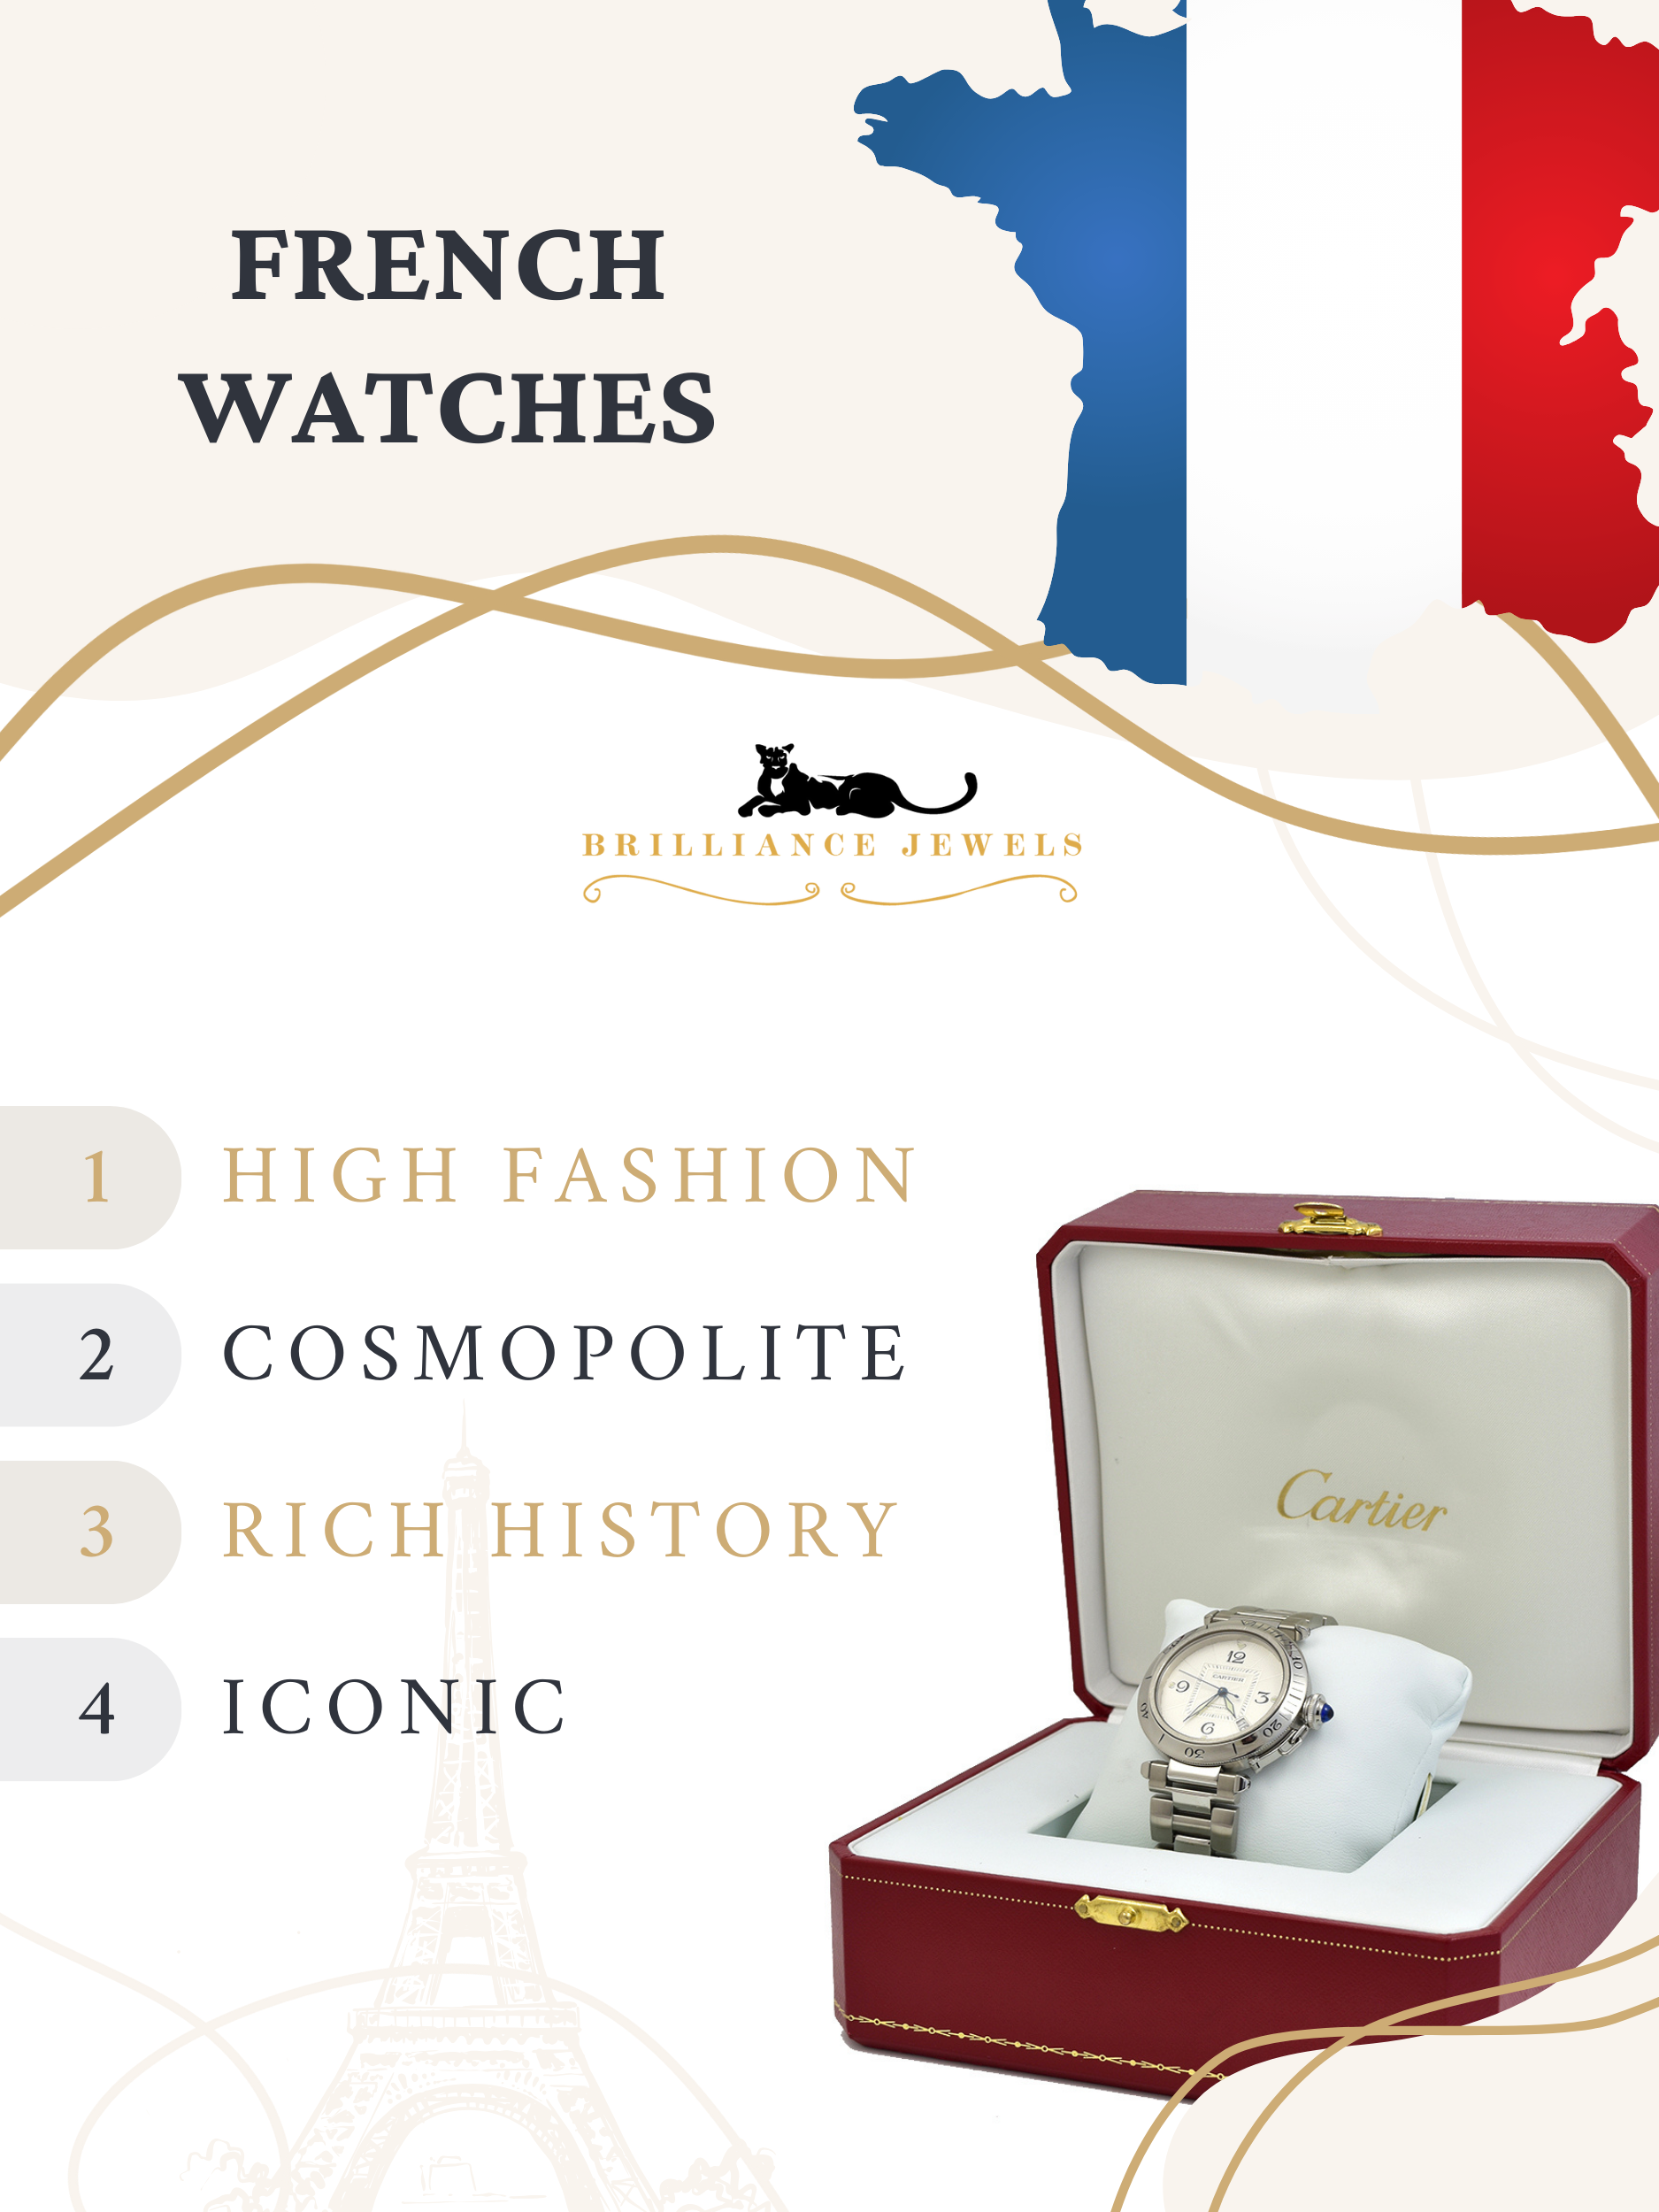 French watches 1 1